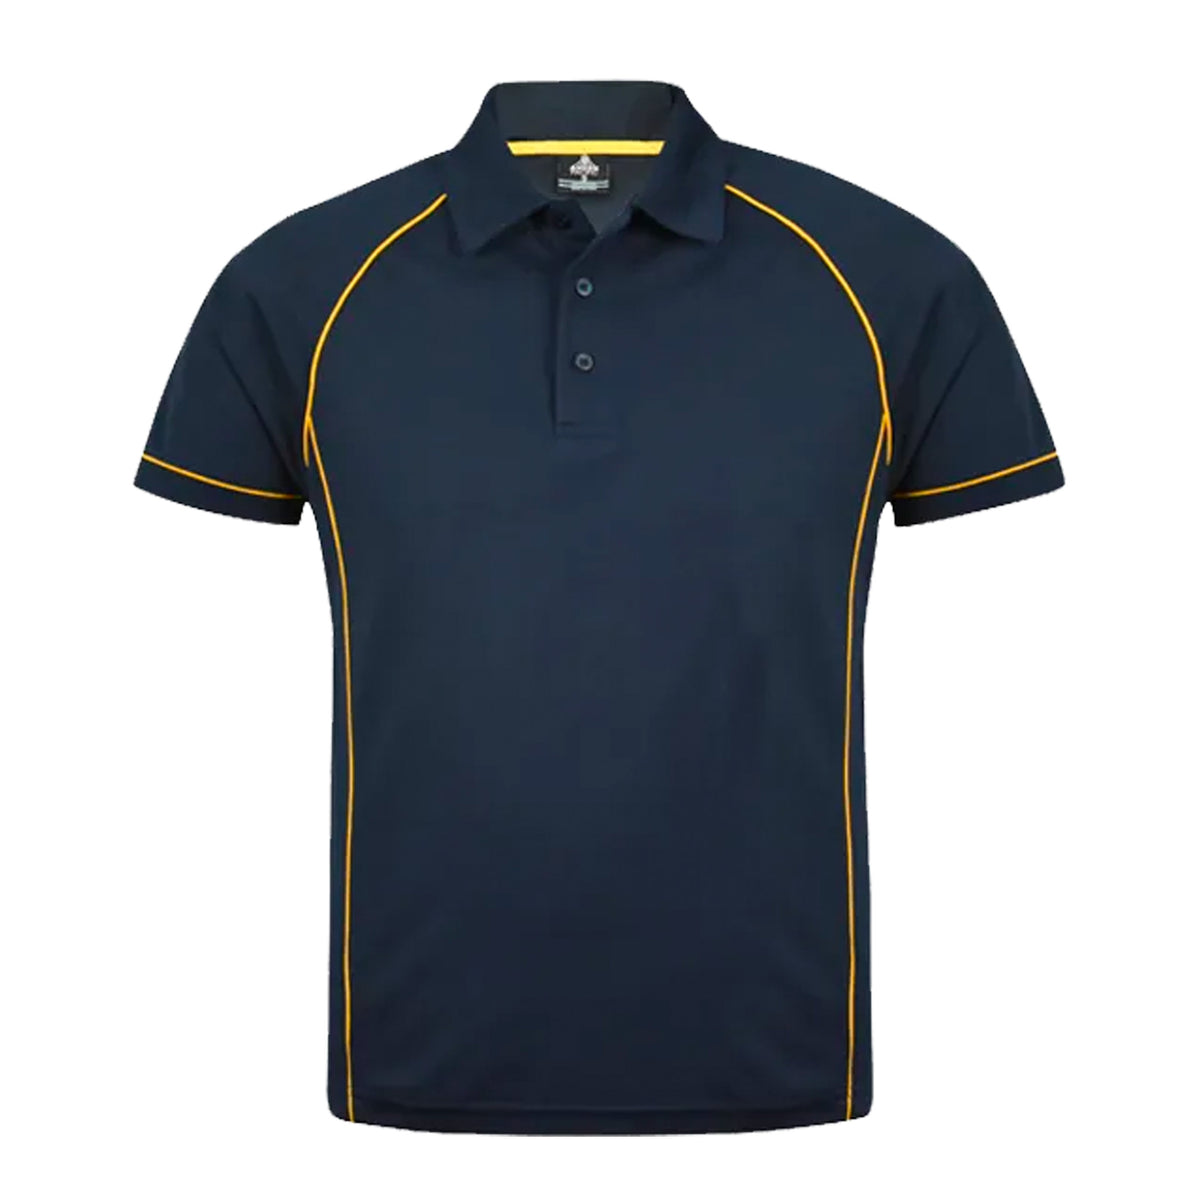 aussie pacific endeavour polo in navy gold